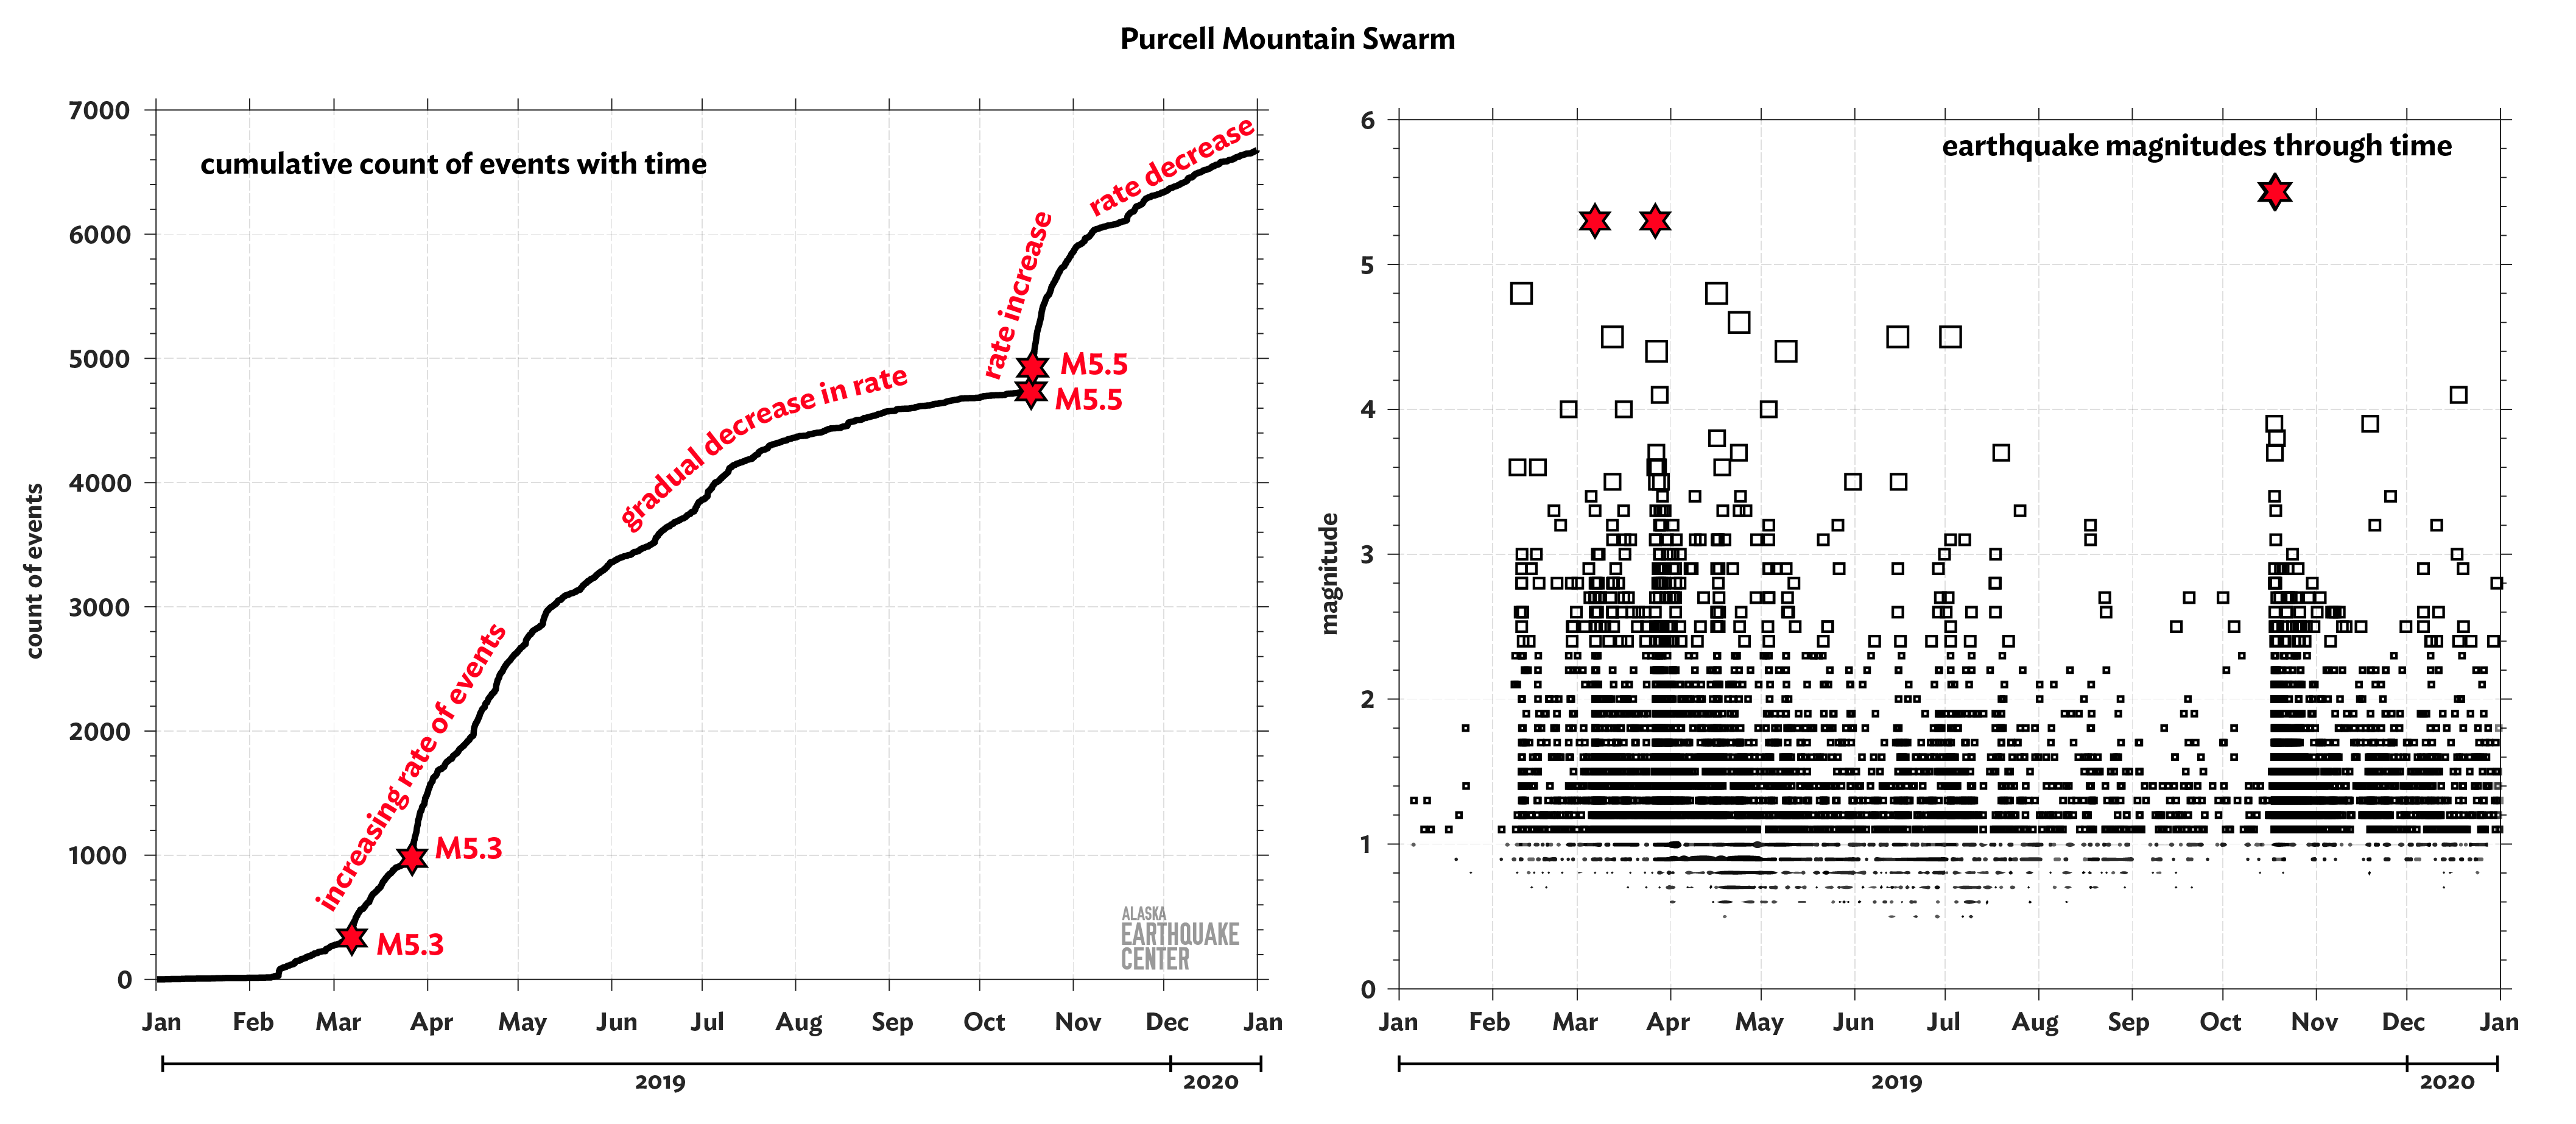 These plots show the cumulative count of earthquakes in the Purcell mountain swarm